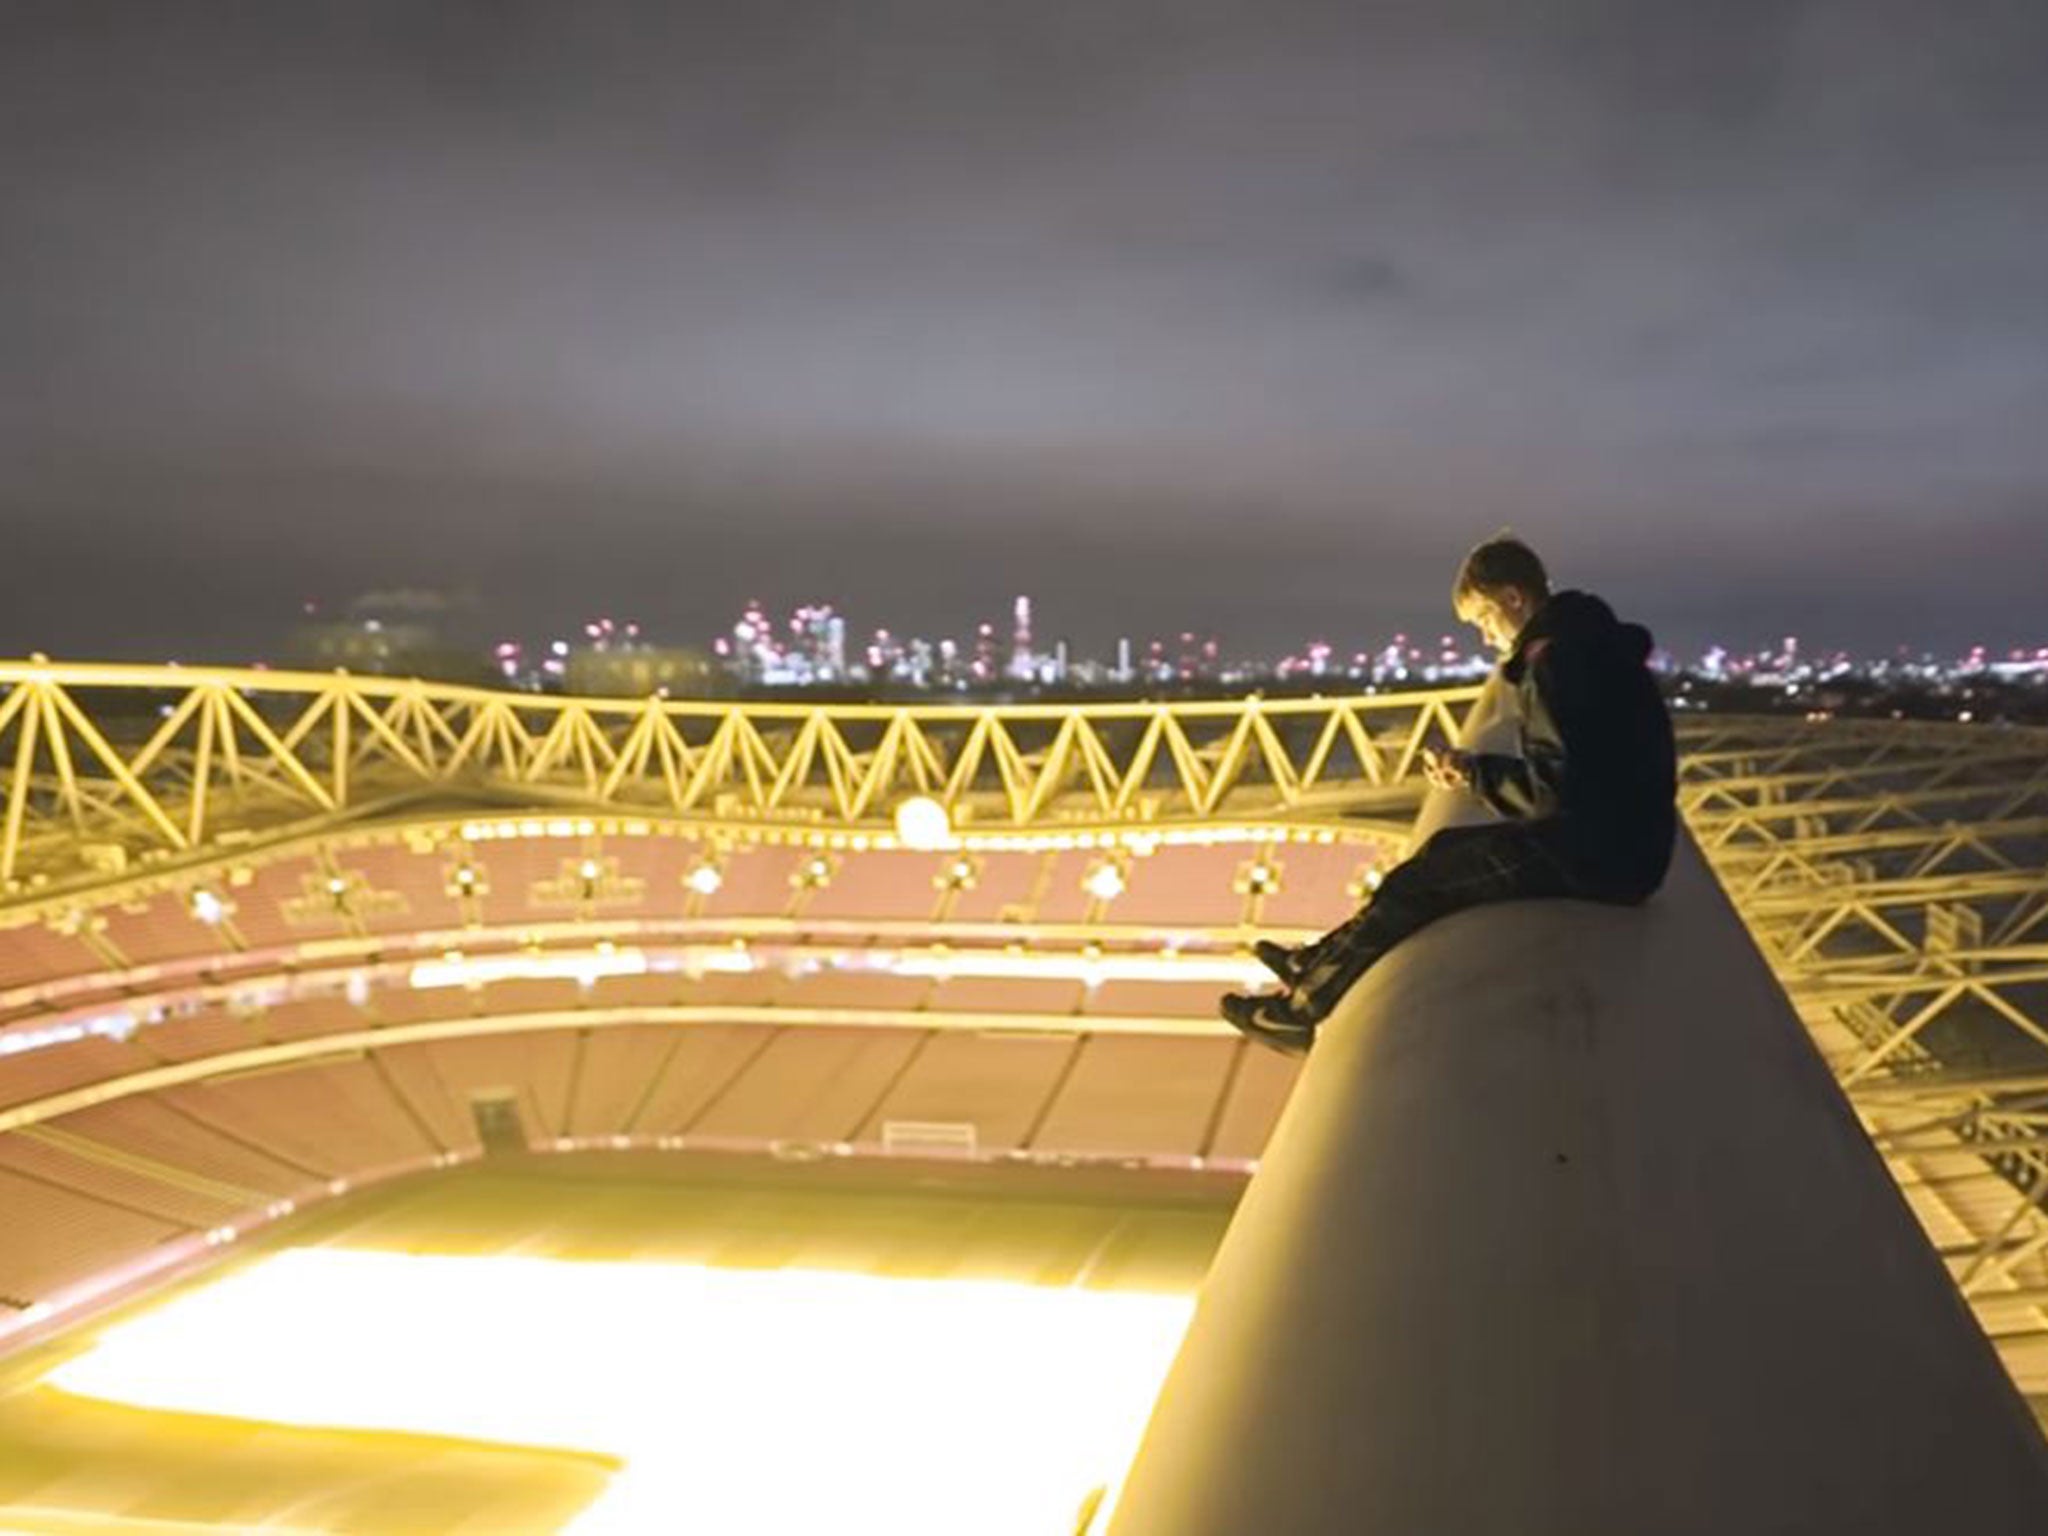 The YouTuber sits atop the Emirates Stadium with the London skyline visible in the background